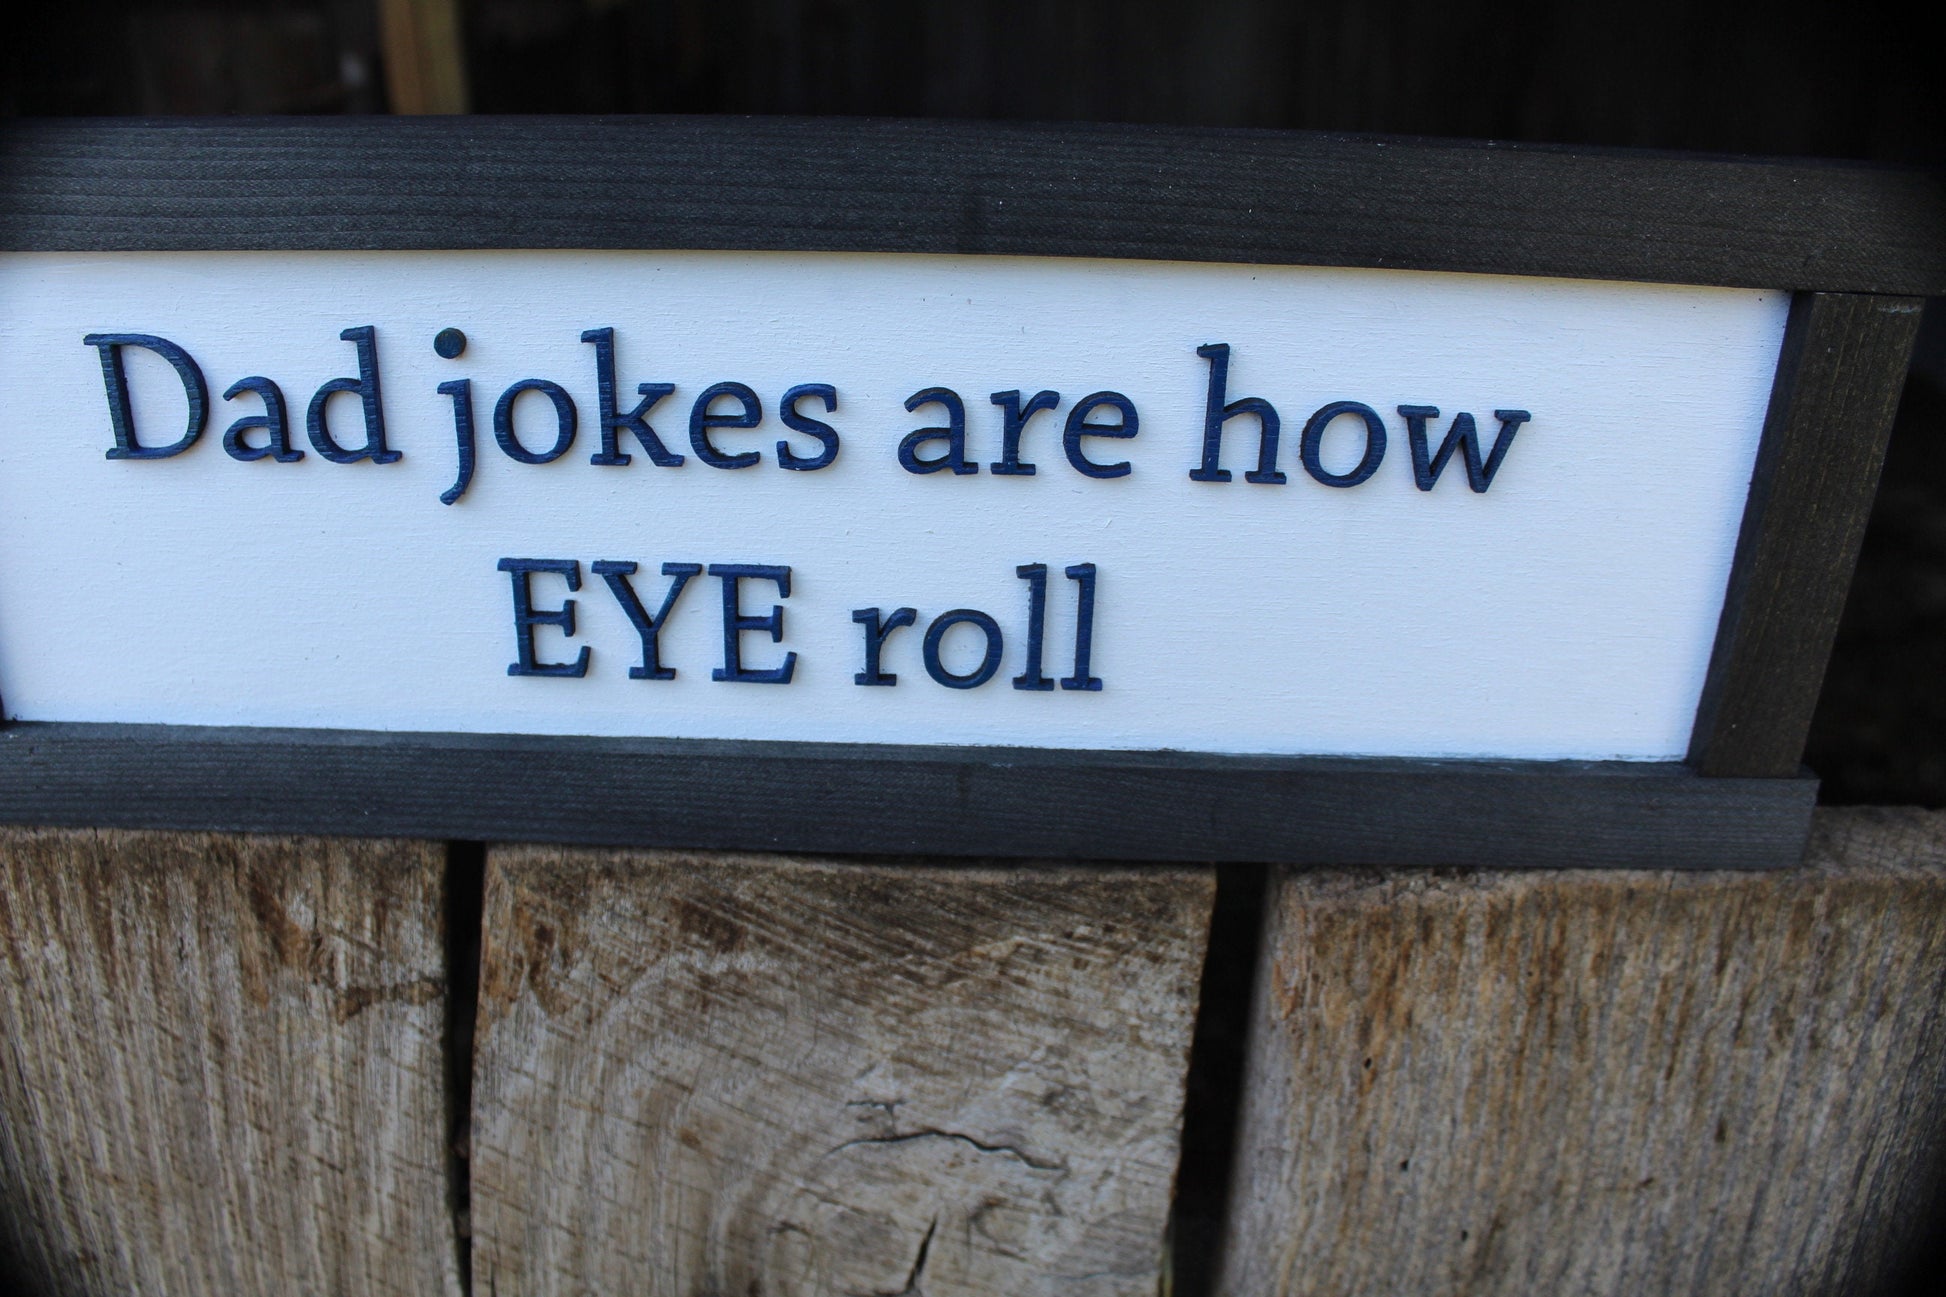 Dad Jokes Are How Eye I Row Silly Fathers Day Gift Pun Wood Sign Text Wall Hanging Decoration Rustic Gift Decor Sarcastic Comedy Gag Gift